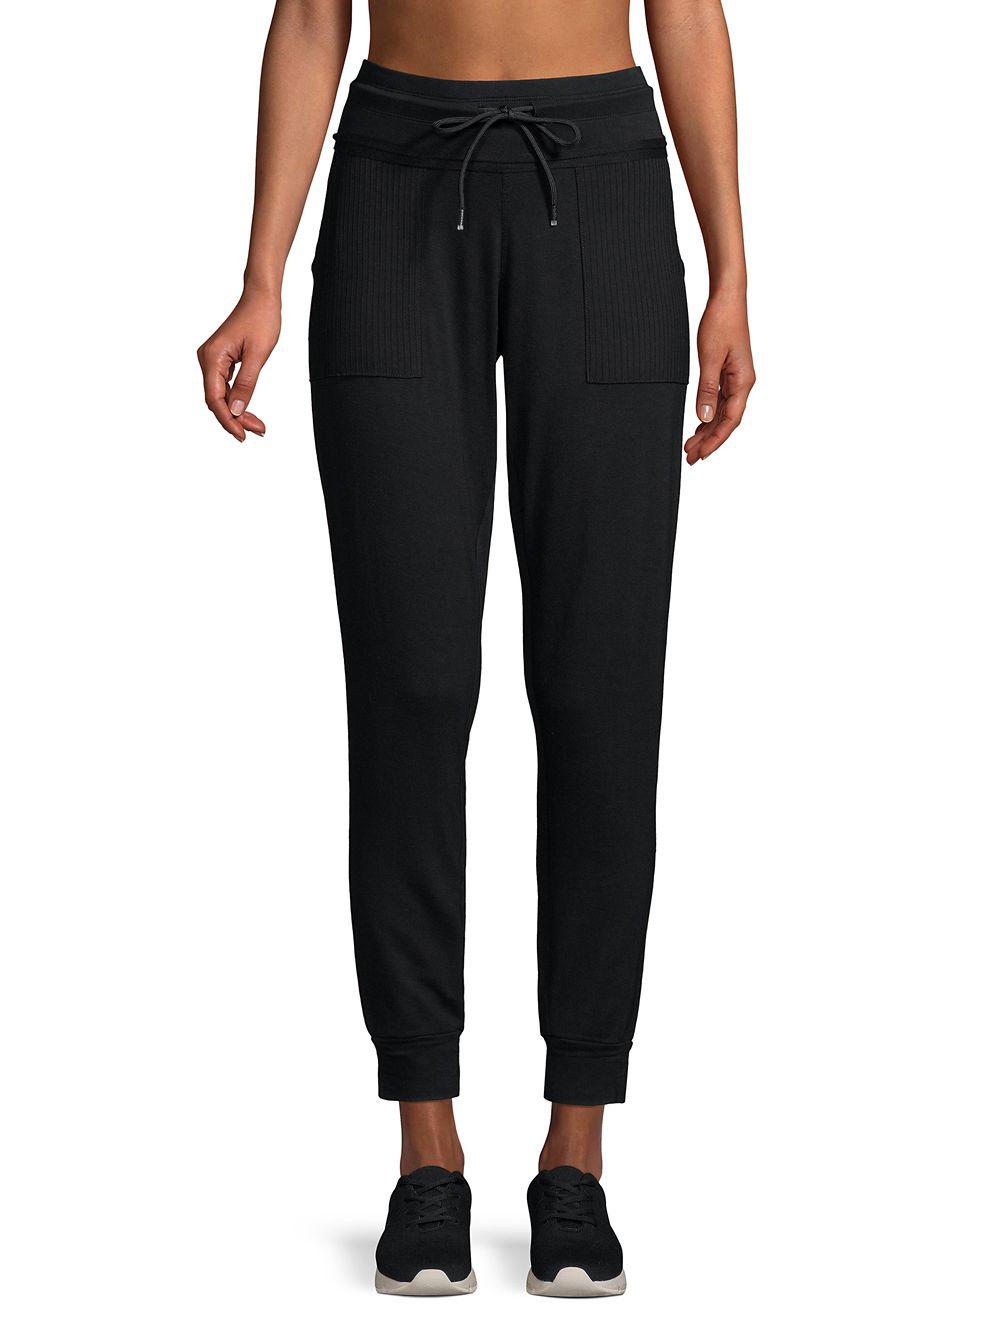 Marc New York Classic Textured Jogger Pants in Black - Lyst